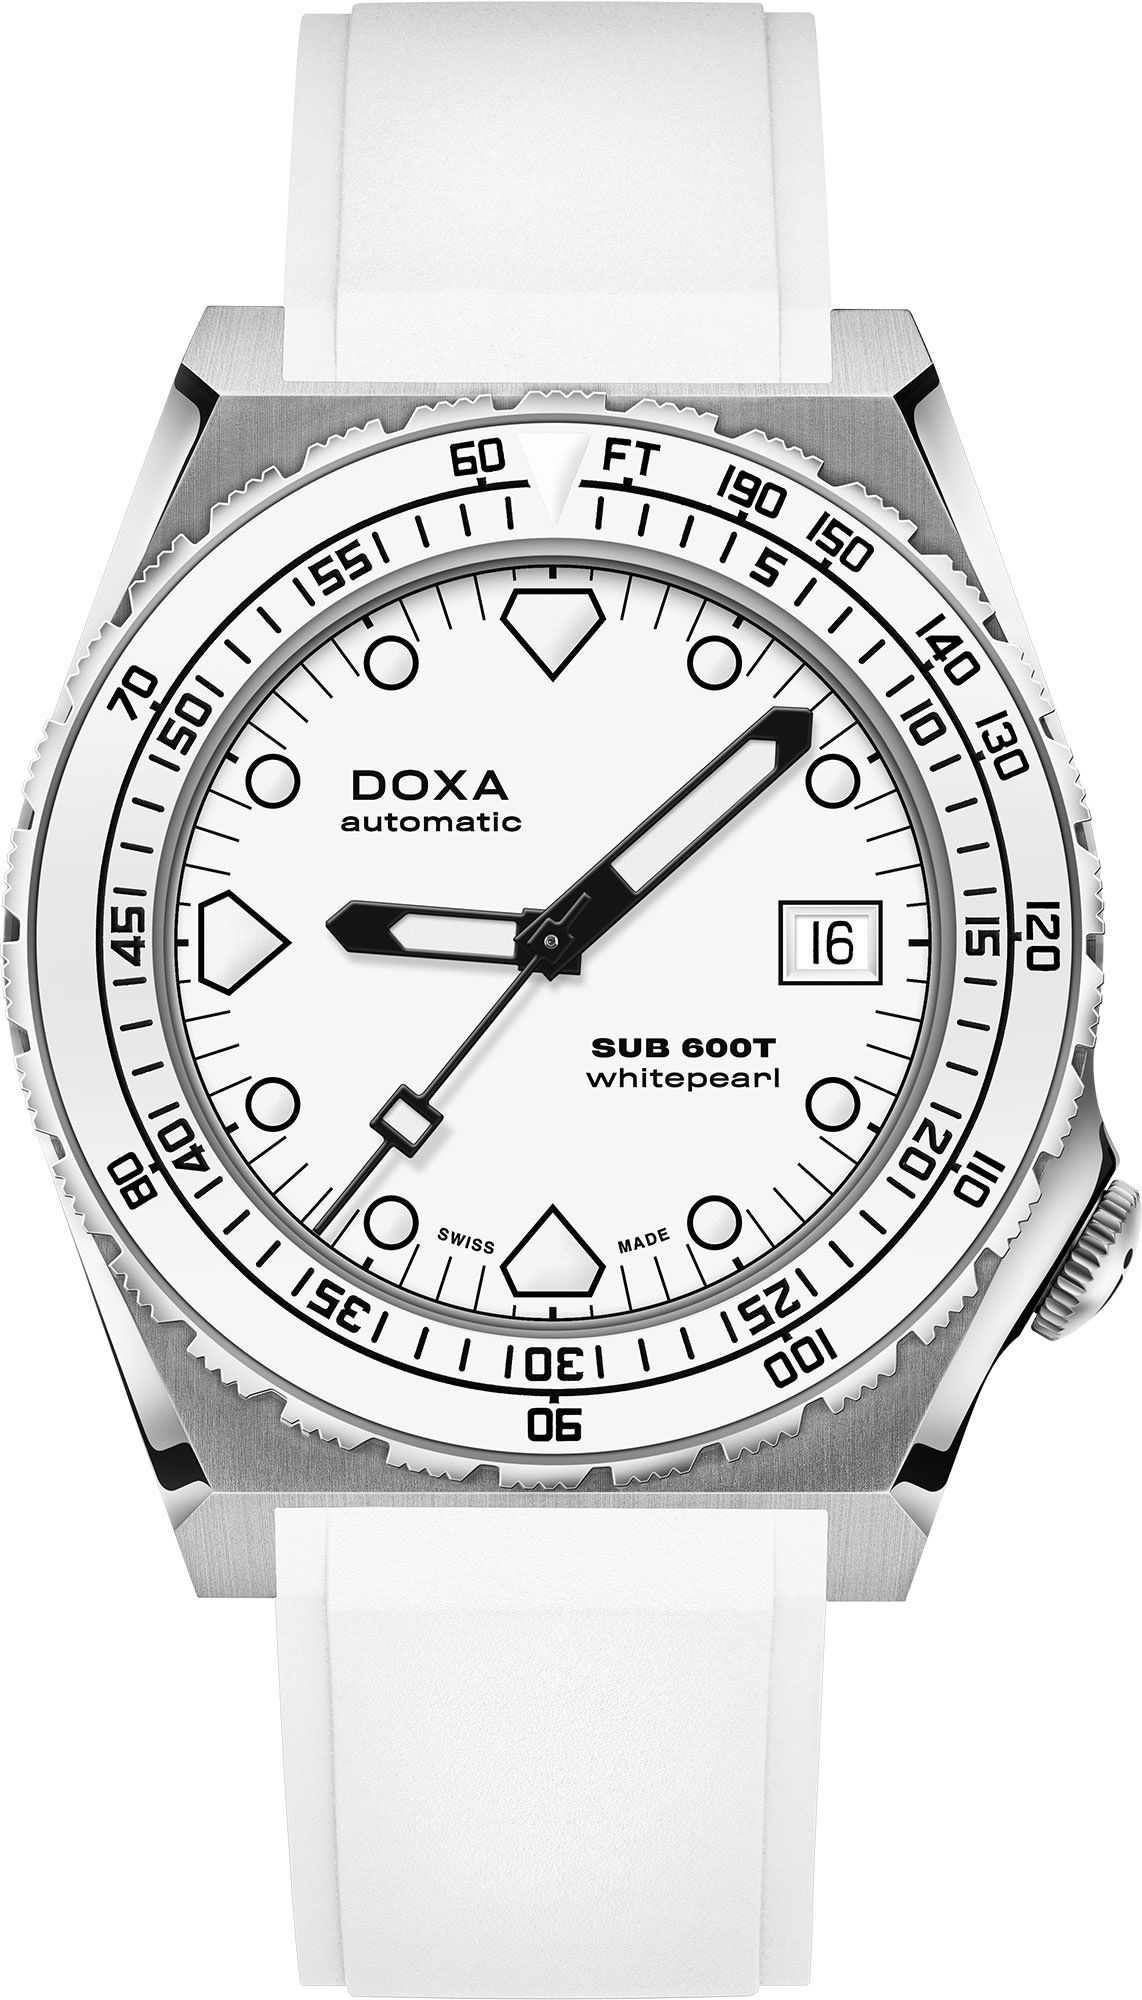 Doxa SUB 600T Whitepearl White Dial 40 mm Automatic Watch For Men - 1